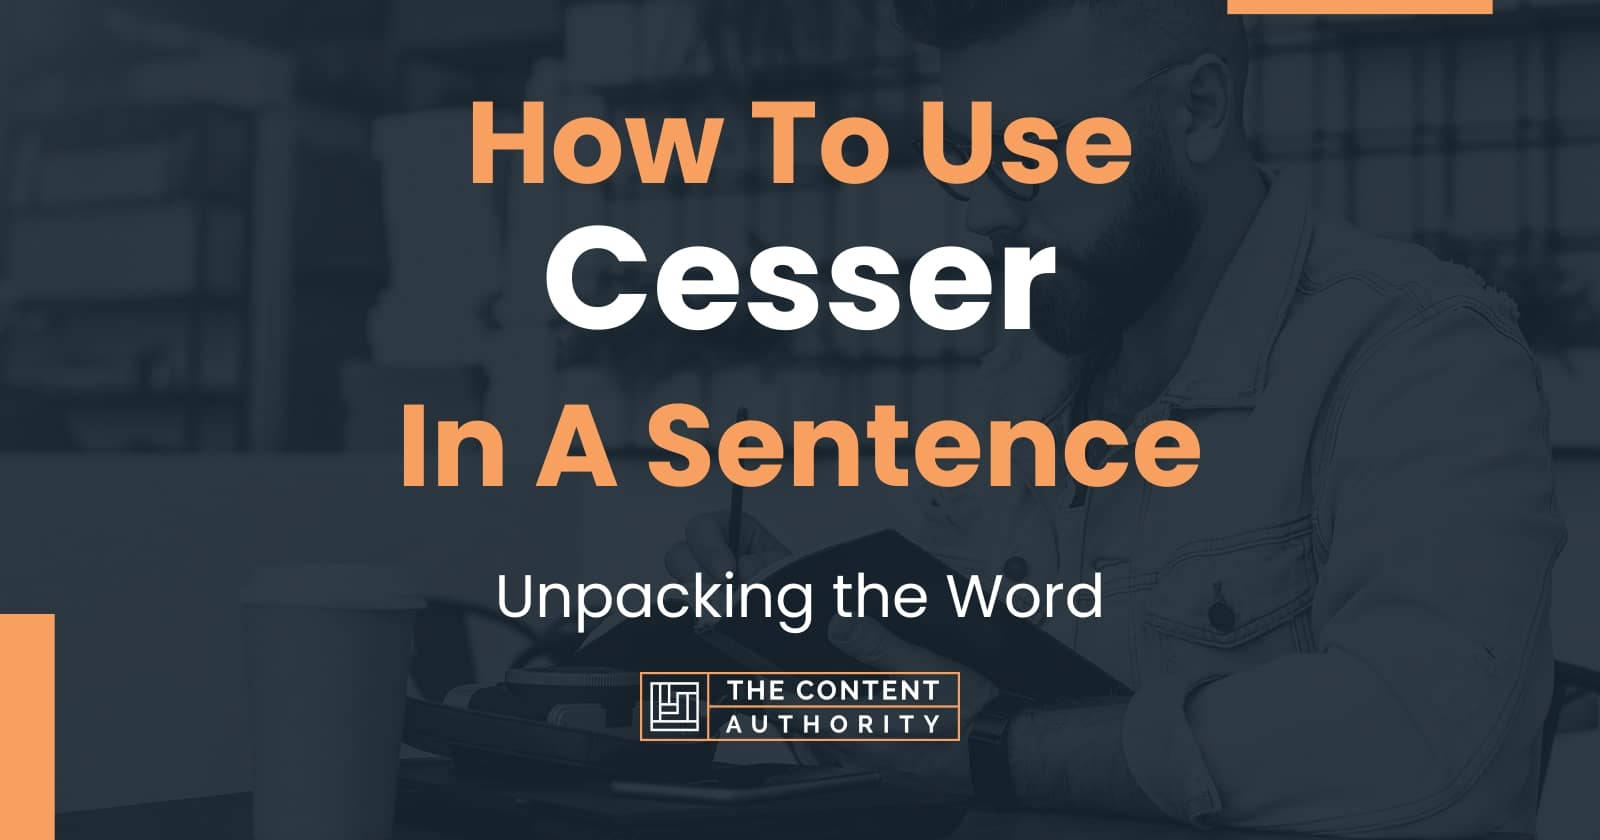 How Is the French Verb Cesser (to Stop) Conjugated?